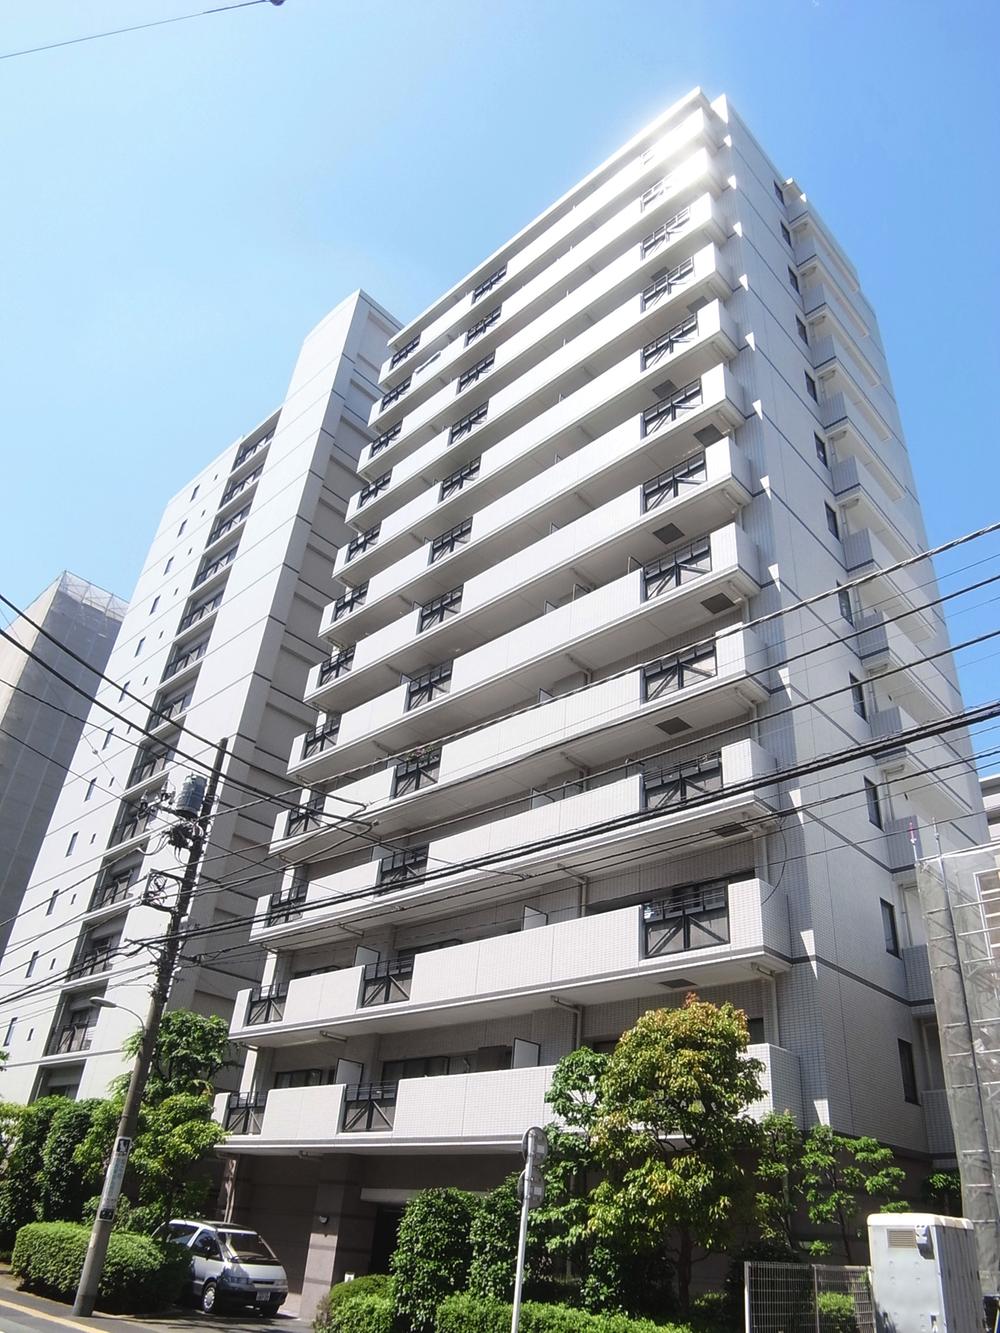 Local appearance photo. Total units 95 units of large-scale apartment (December 2013) Shooting